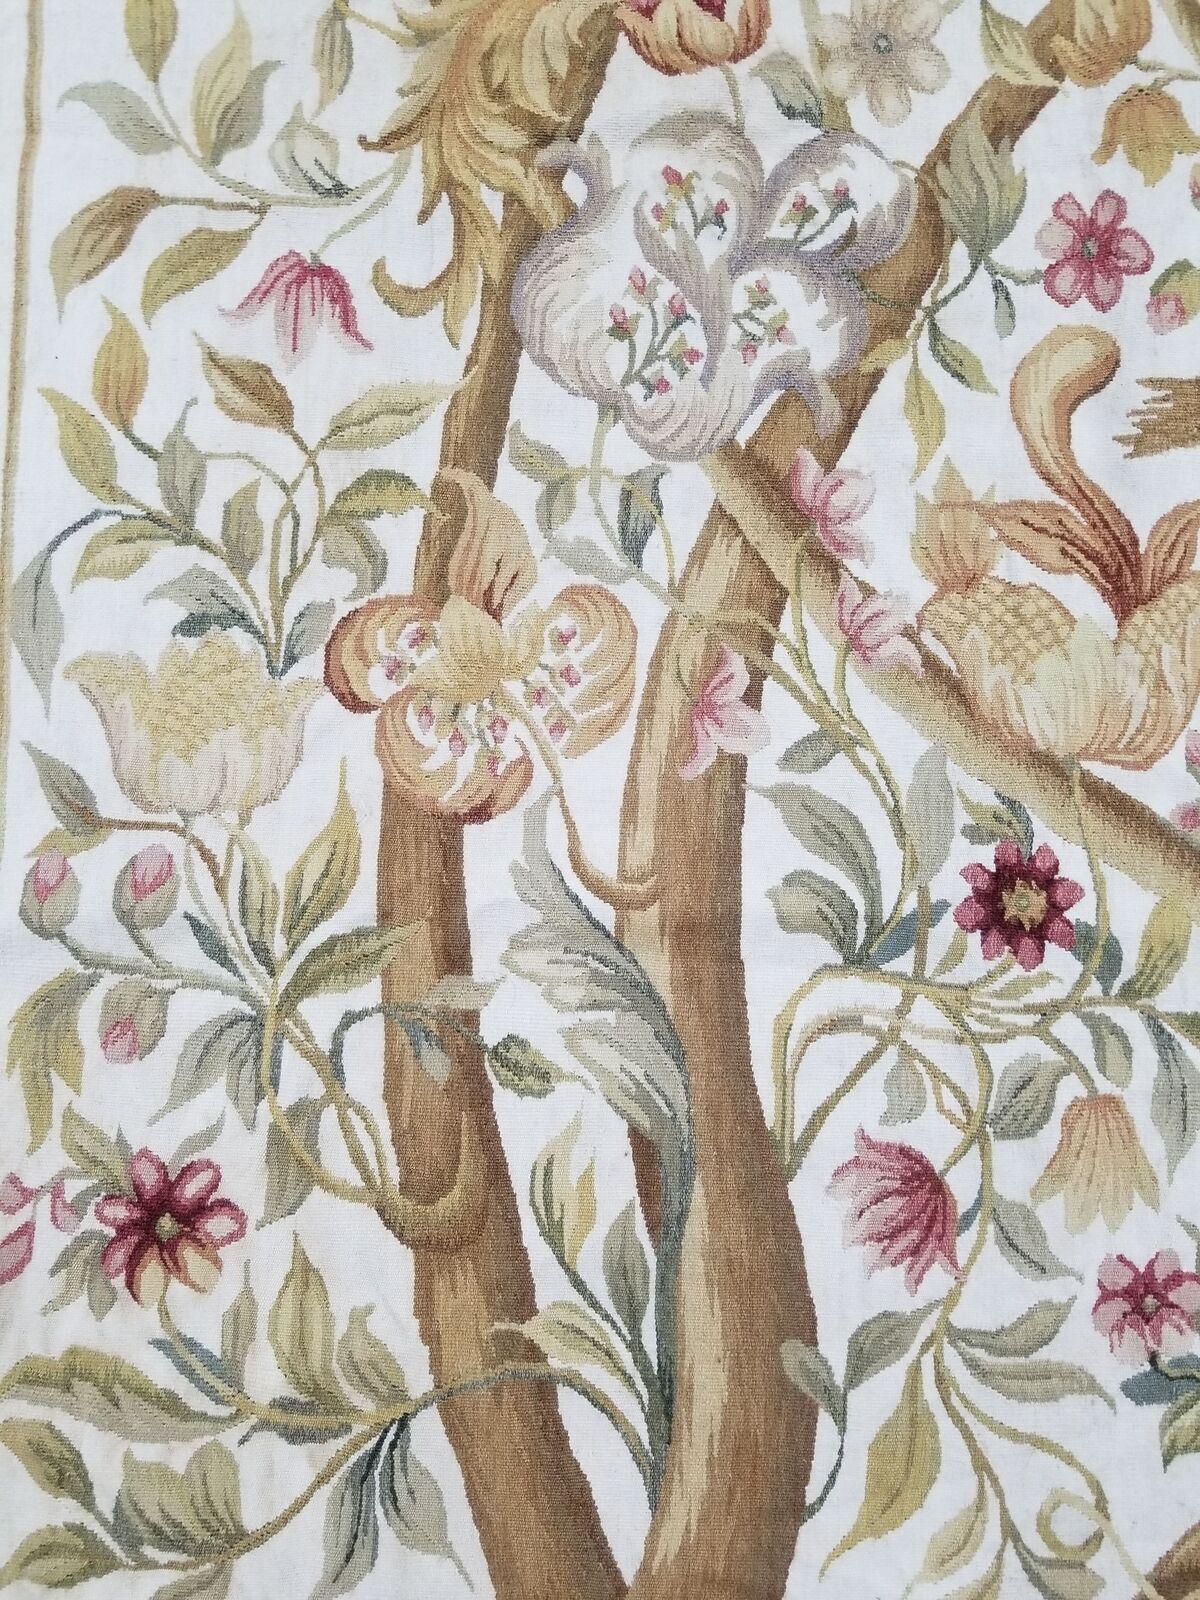 19thc. French Antique Louis XVI style Floral Aubusson Wall Hanging / Tapestry For Sale 6